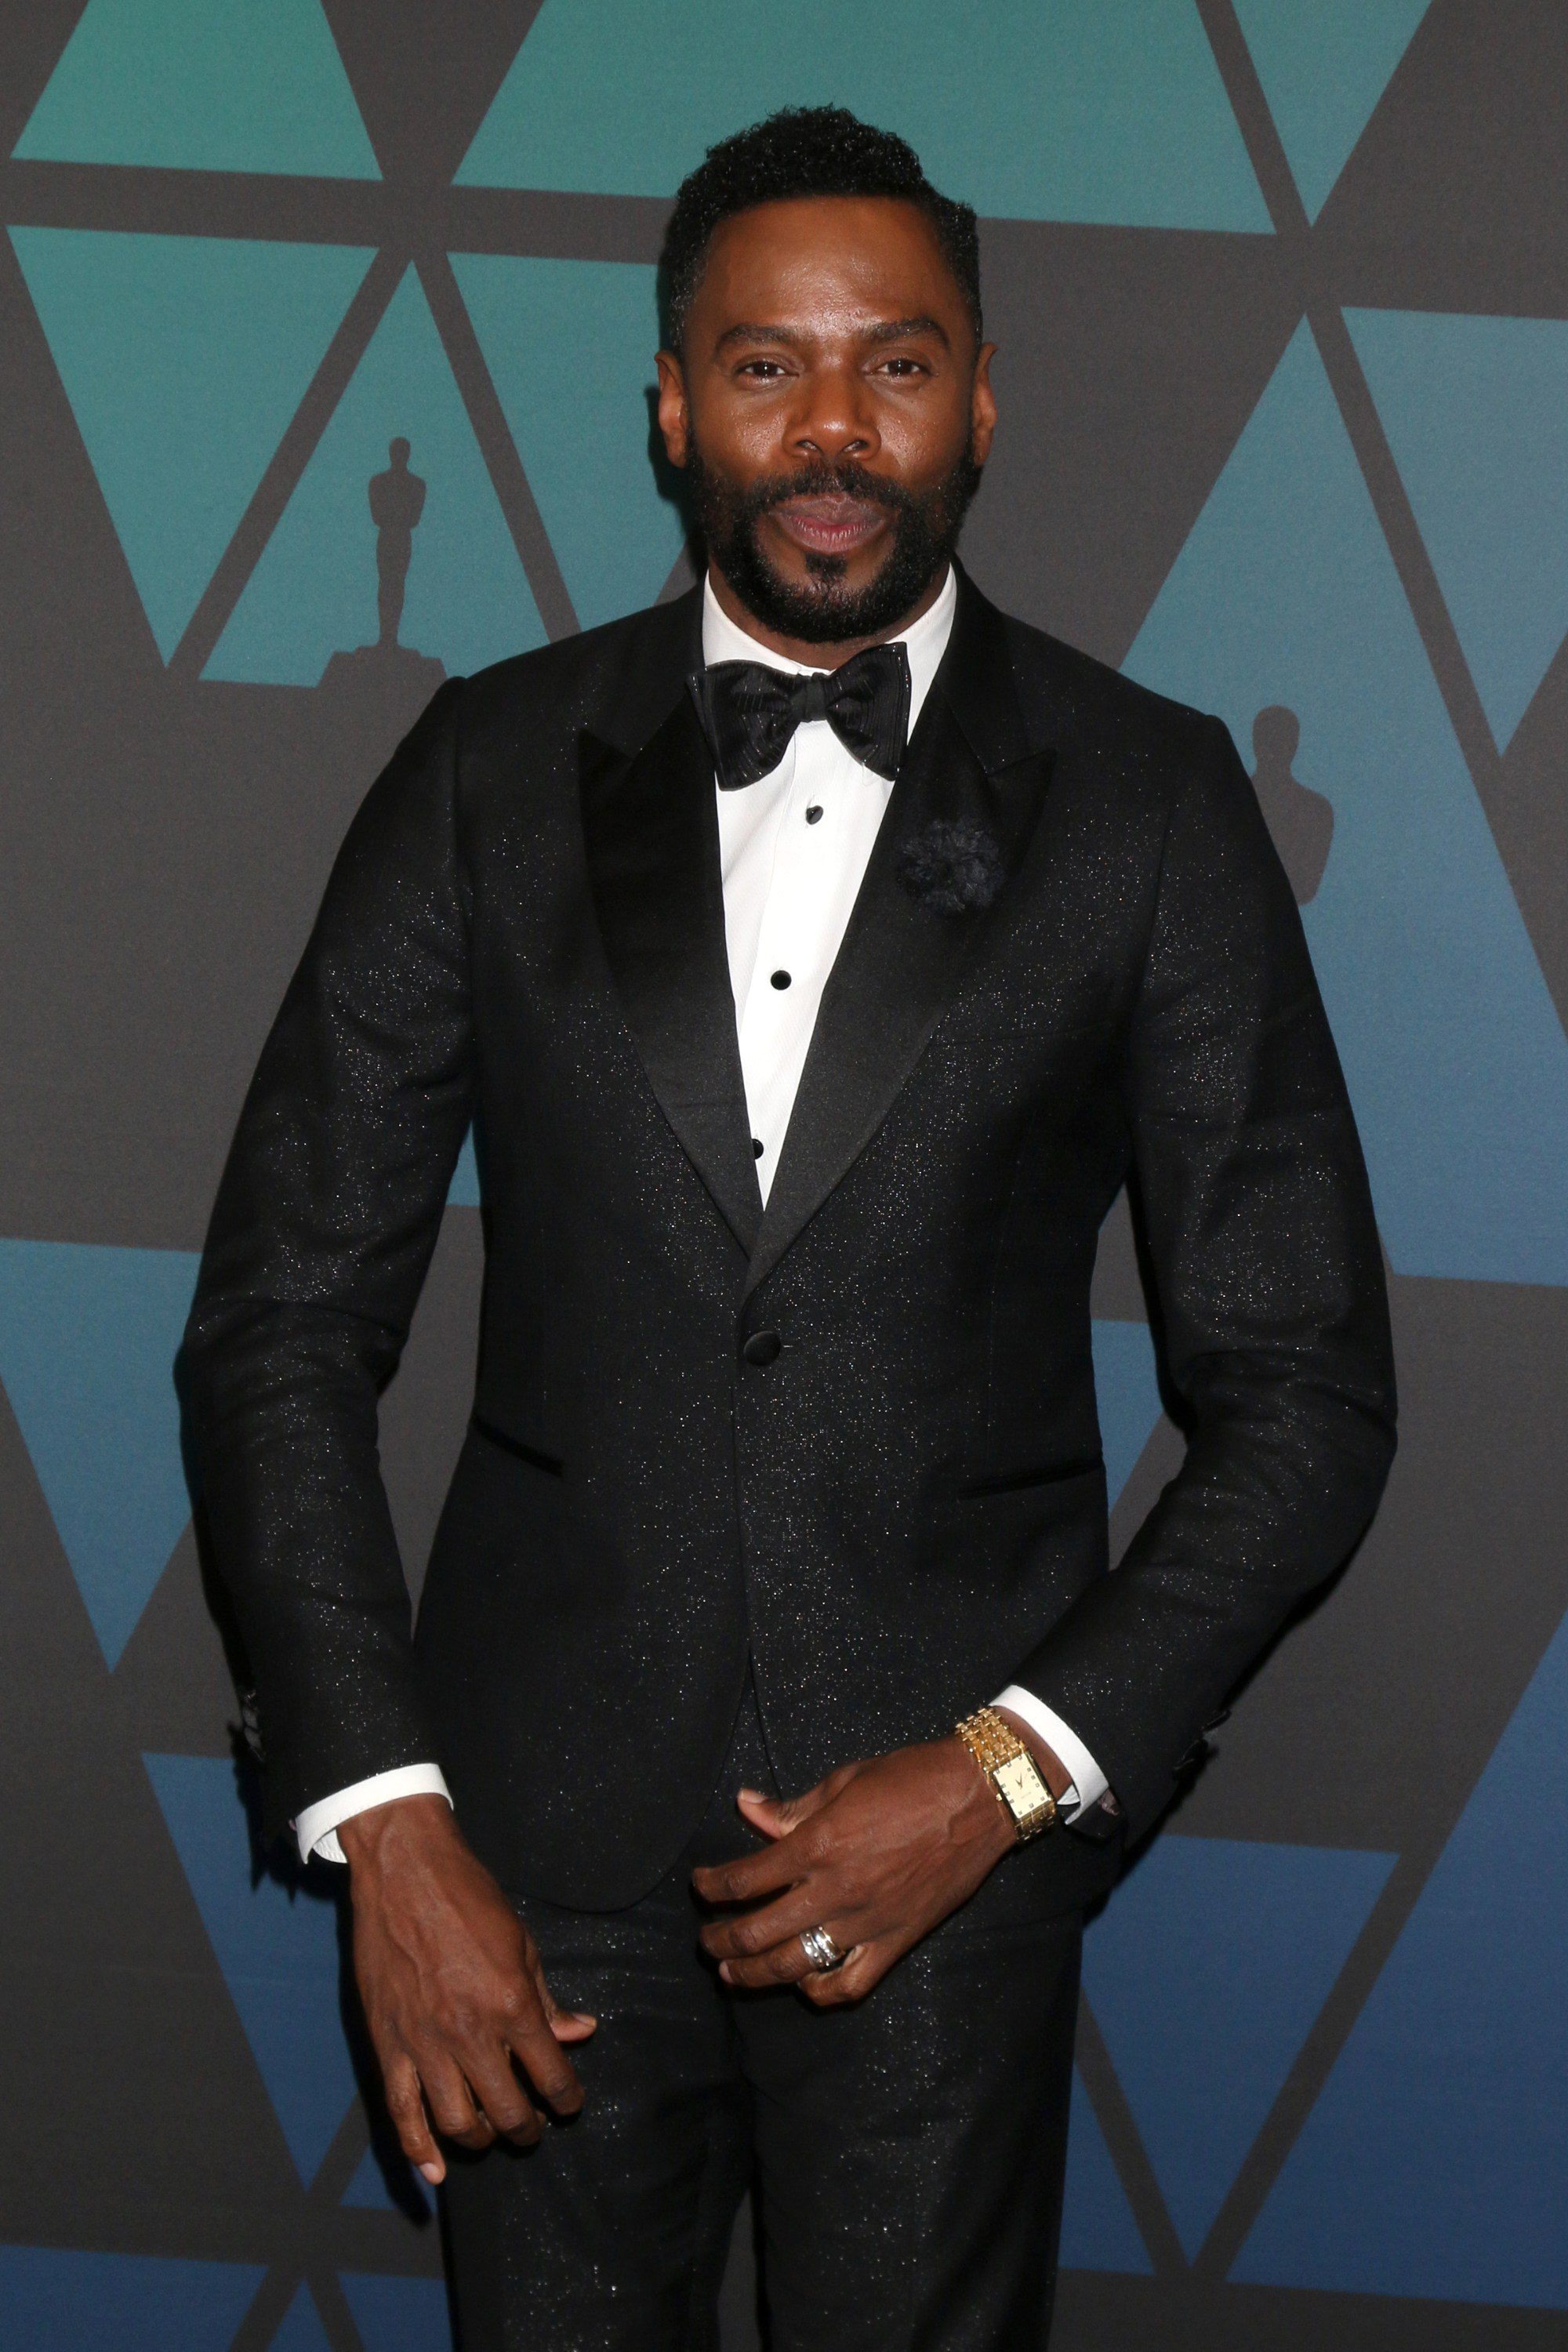 Colman Domingo poses at the 10th Annual Governors Awards in Los Angeles.